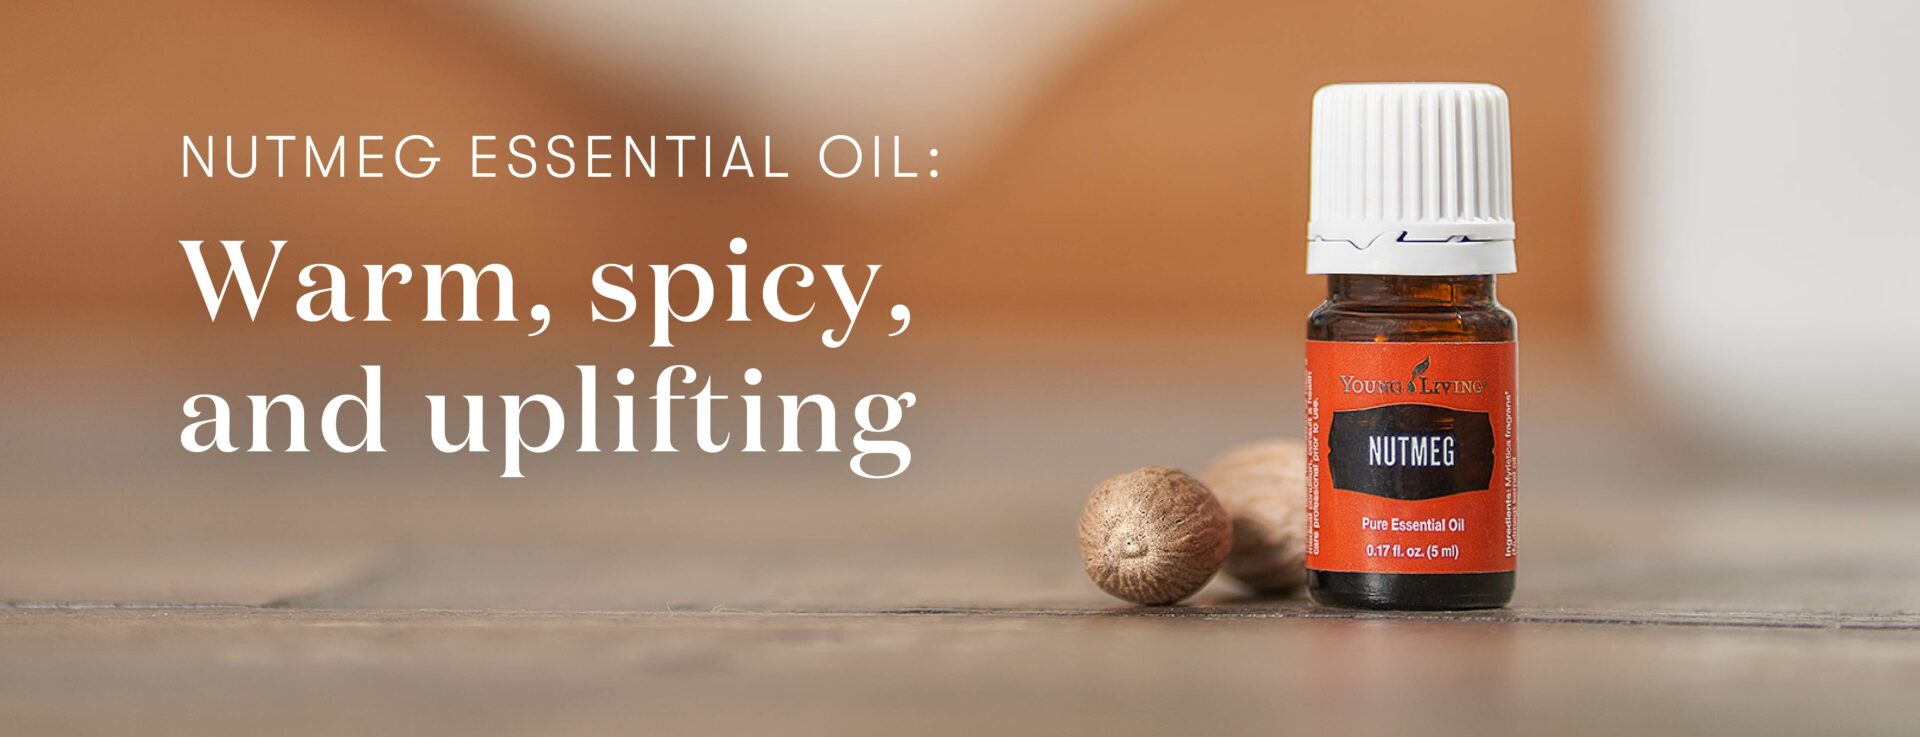 Nutmeg essential oil: Warm, spicy, and uplifting